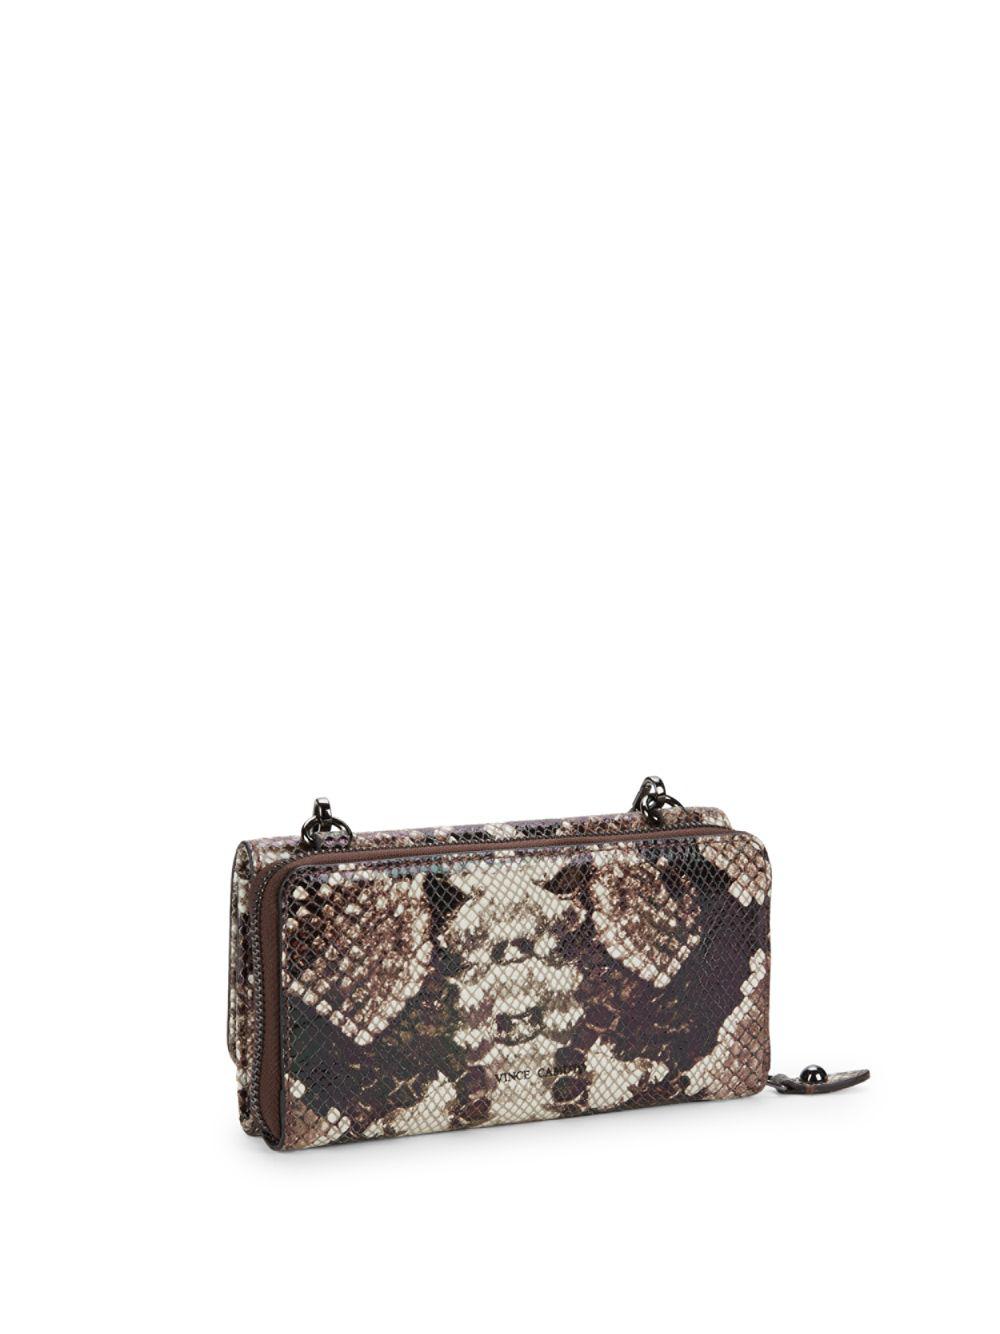 Vince Camuto Small Leather Snakeskin Print Crossbody Bag - Lyst